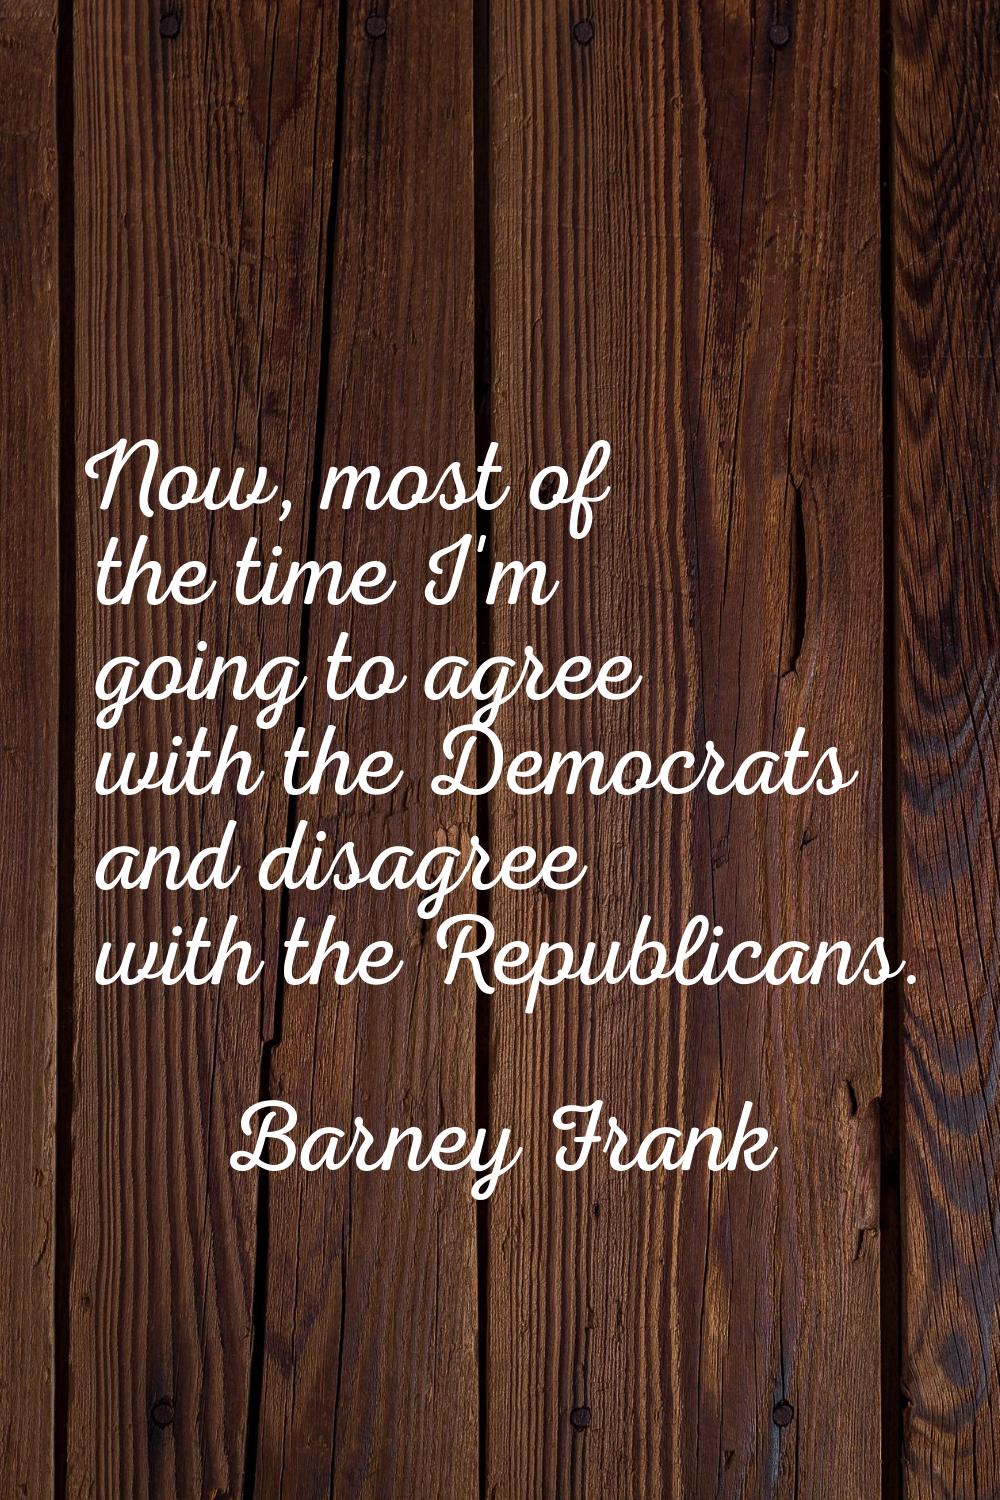 Now, most of the time I'm going to agree with the Democrats and disagree with the Republicans.